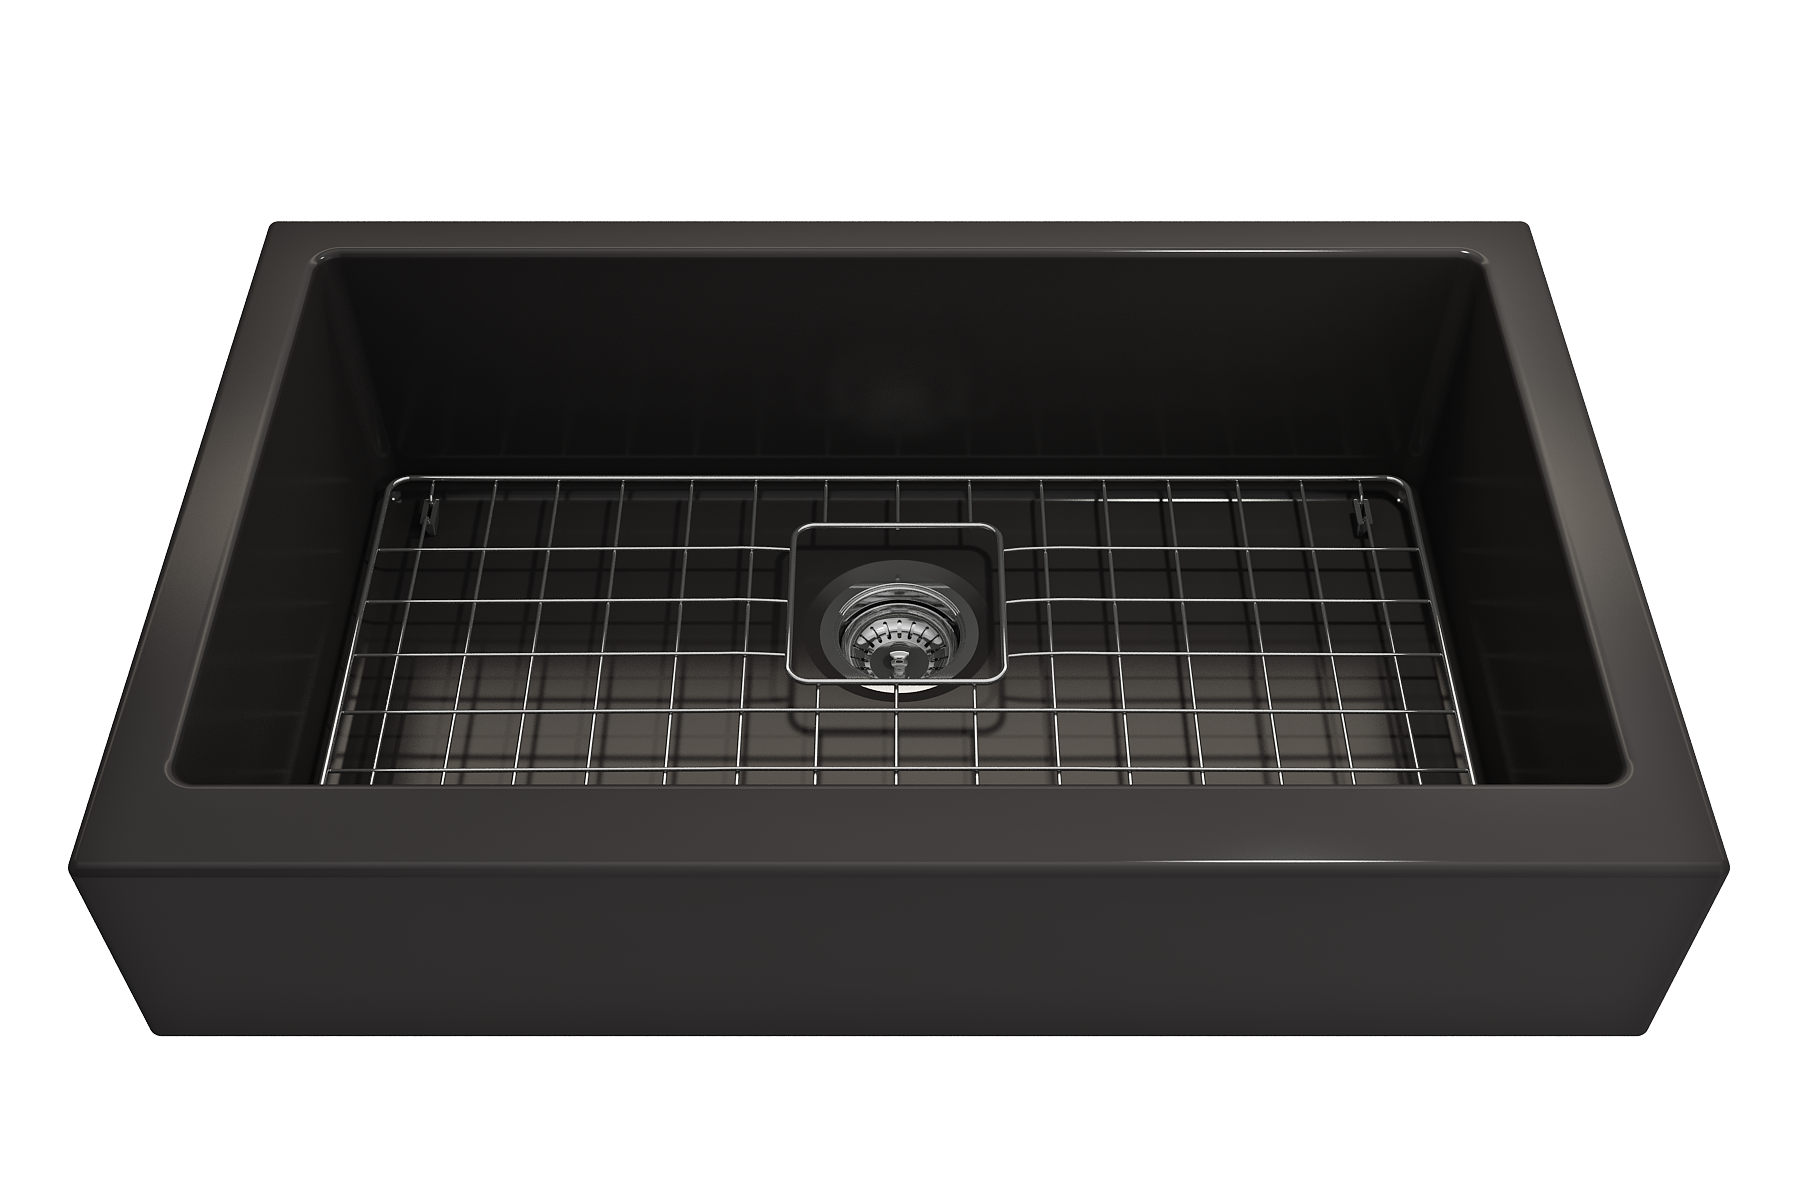 Nuova Pro Short Apron Front Dual-Mount Fireclay 34 in. Single Bowl Kitchen Sink with Protective Bottom Grid and Strainer in Matte Black